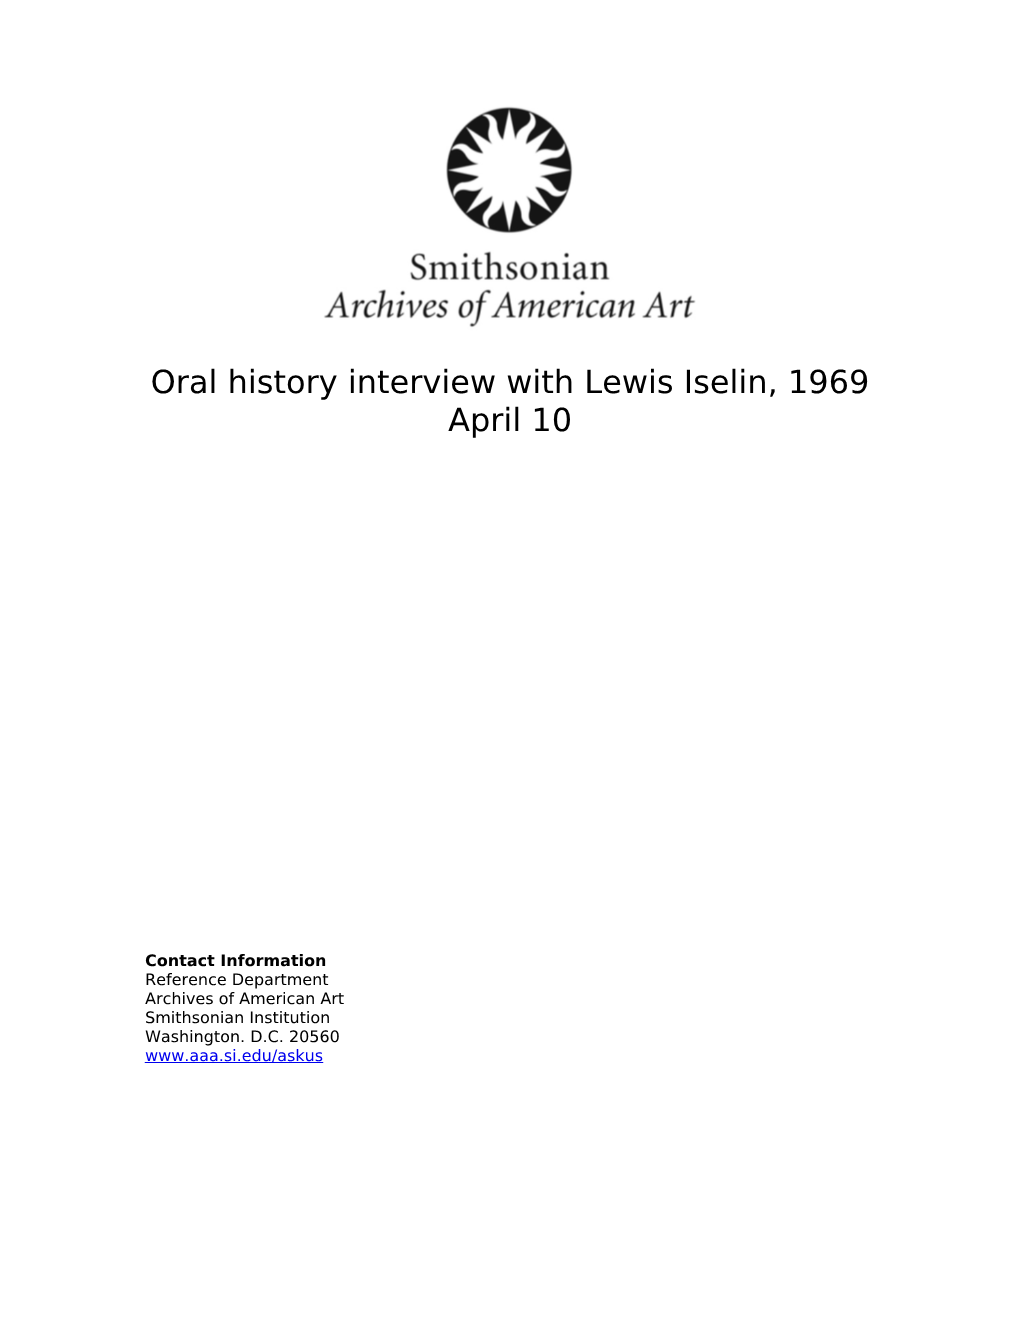 Oral History Interview with Lewis Iselin, 1969 April 10